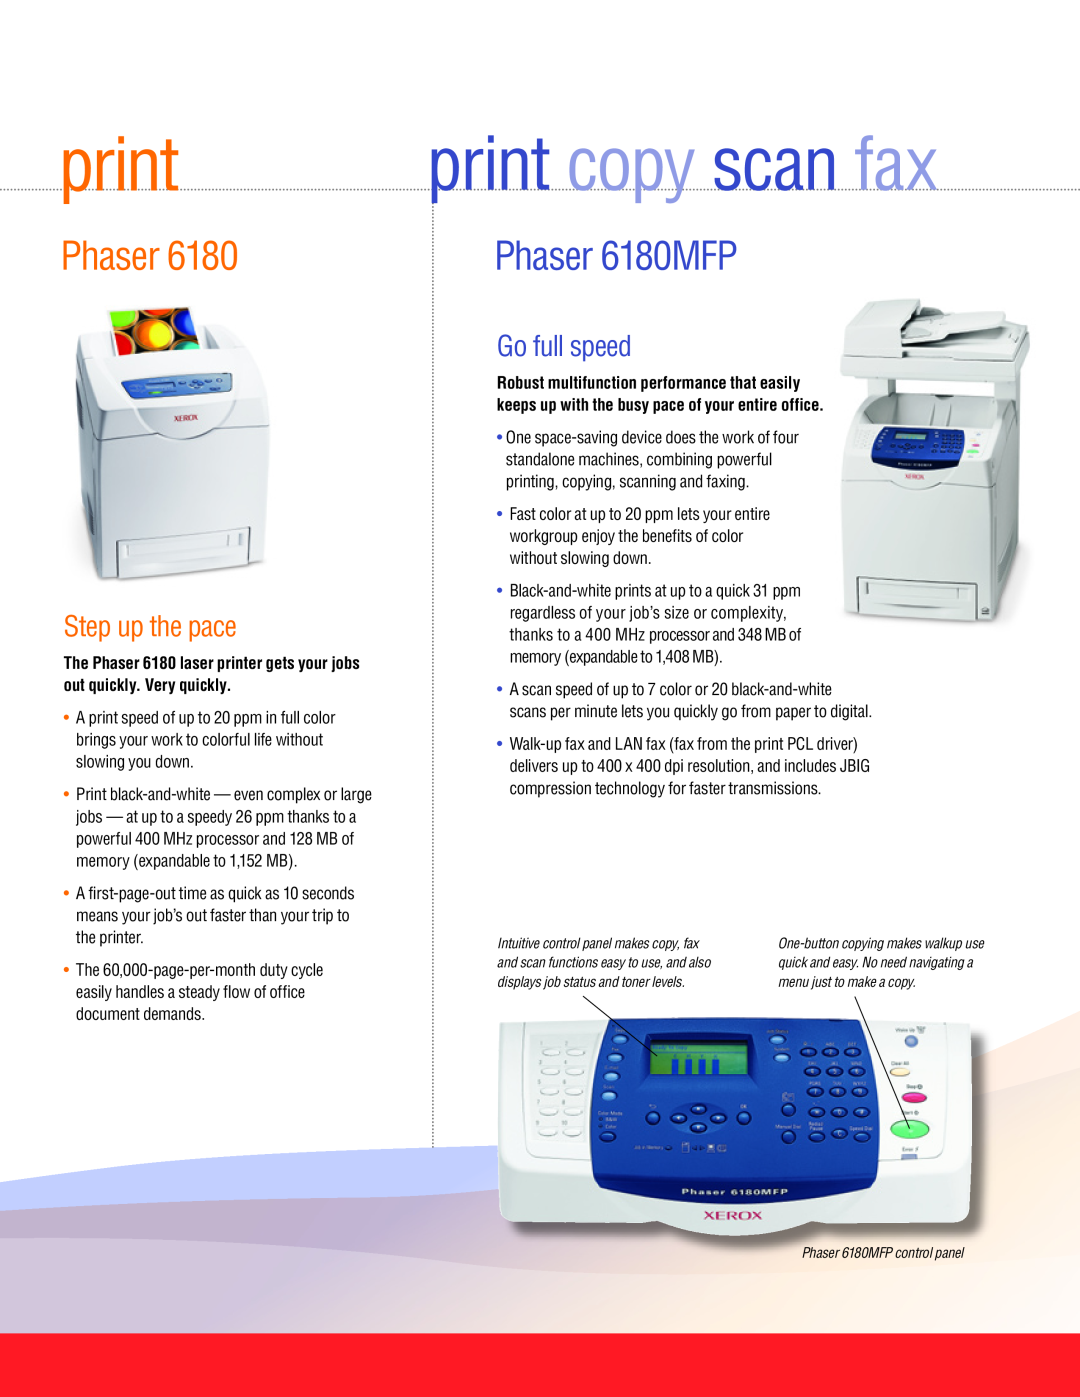 Xerox manual print copy scan fax, Phaser 6180MFP, Step up the pace, Go full speed 